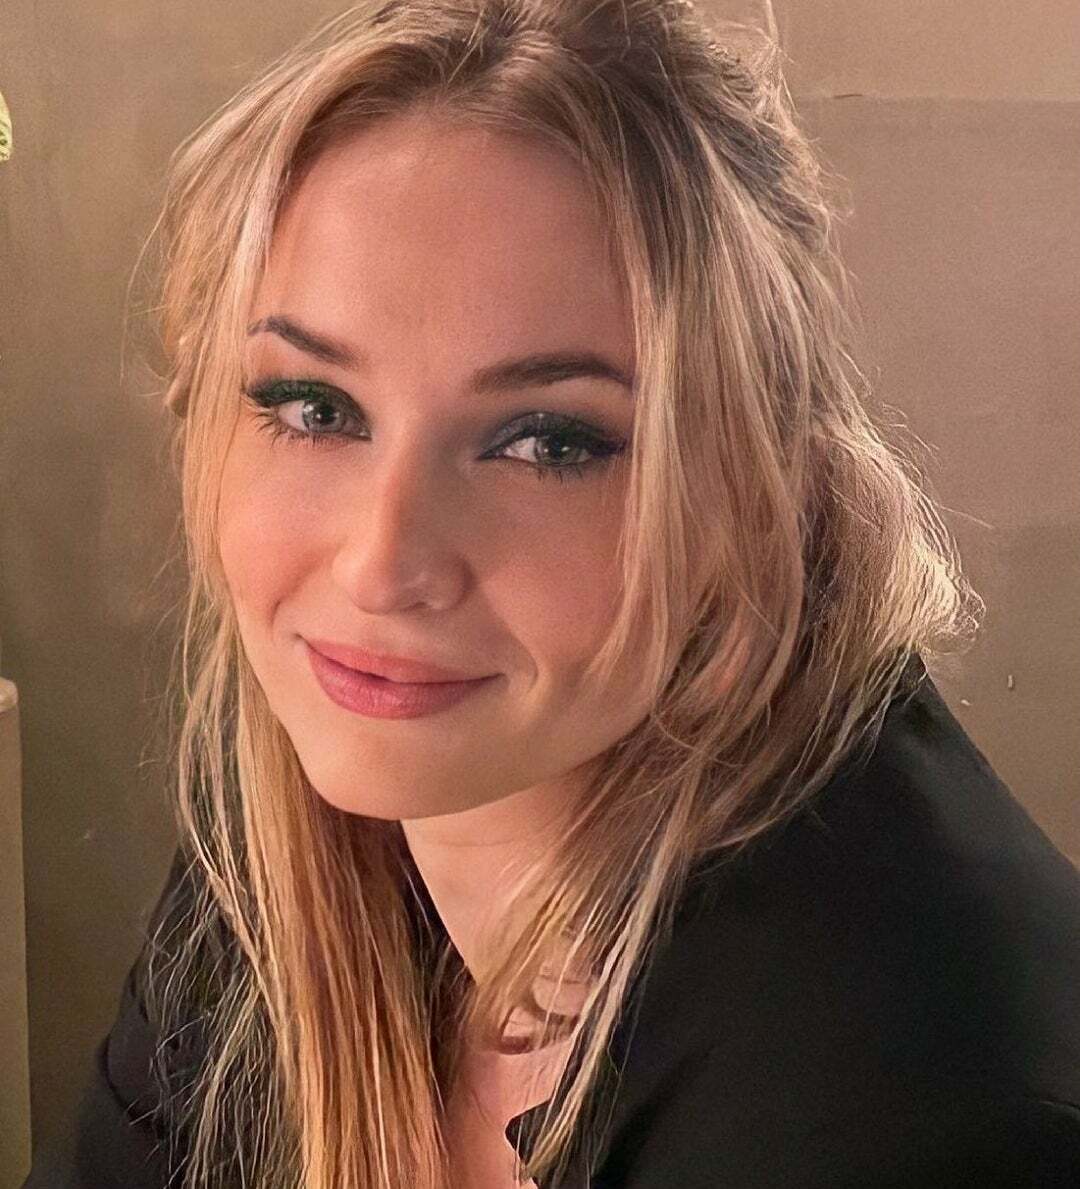 I would love to finish over Sophie Turner's face